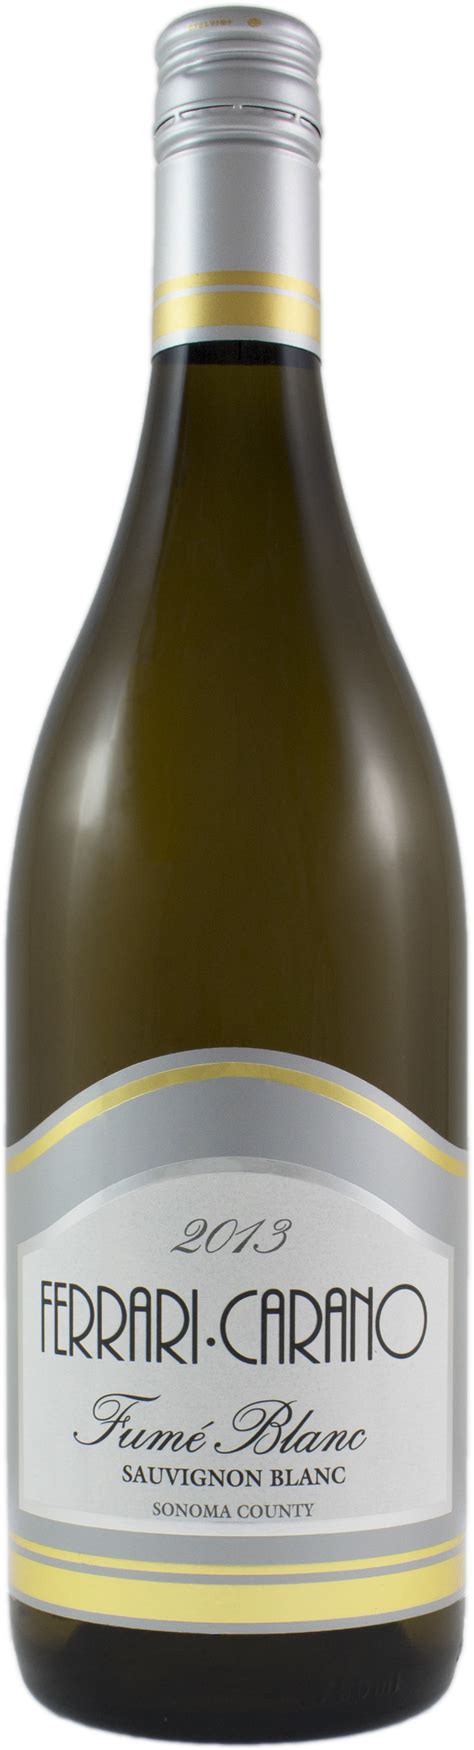 One of the first two wines ferrari‐carano ever made 40 years ago, our fumé… $15. 2013 Ferrari Carano Fume Blanc | Wine Library